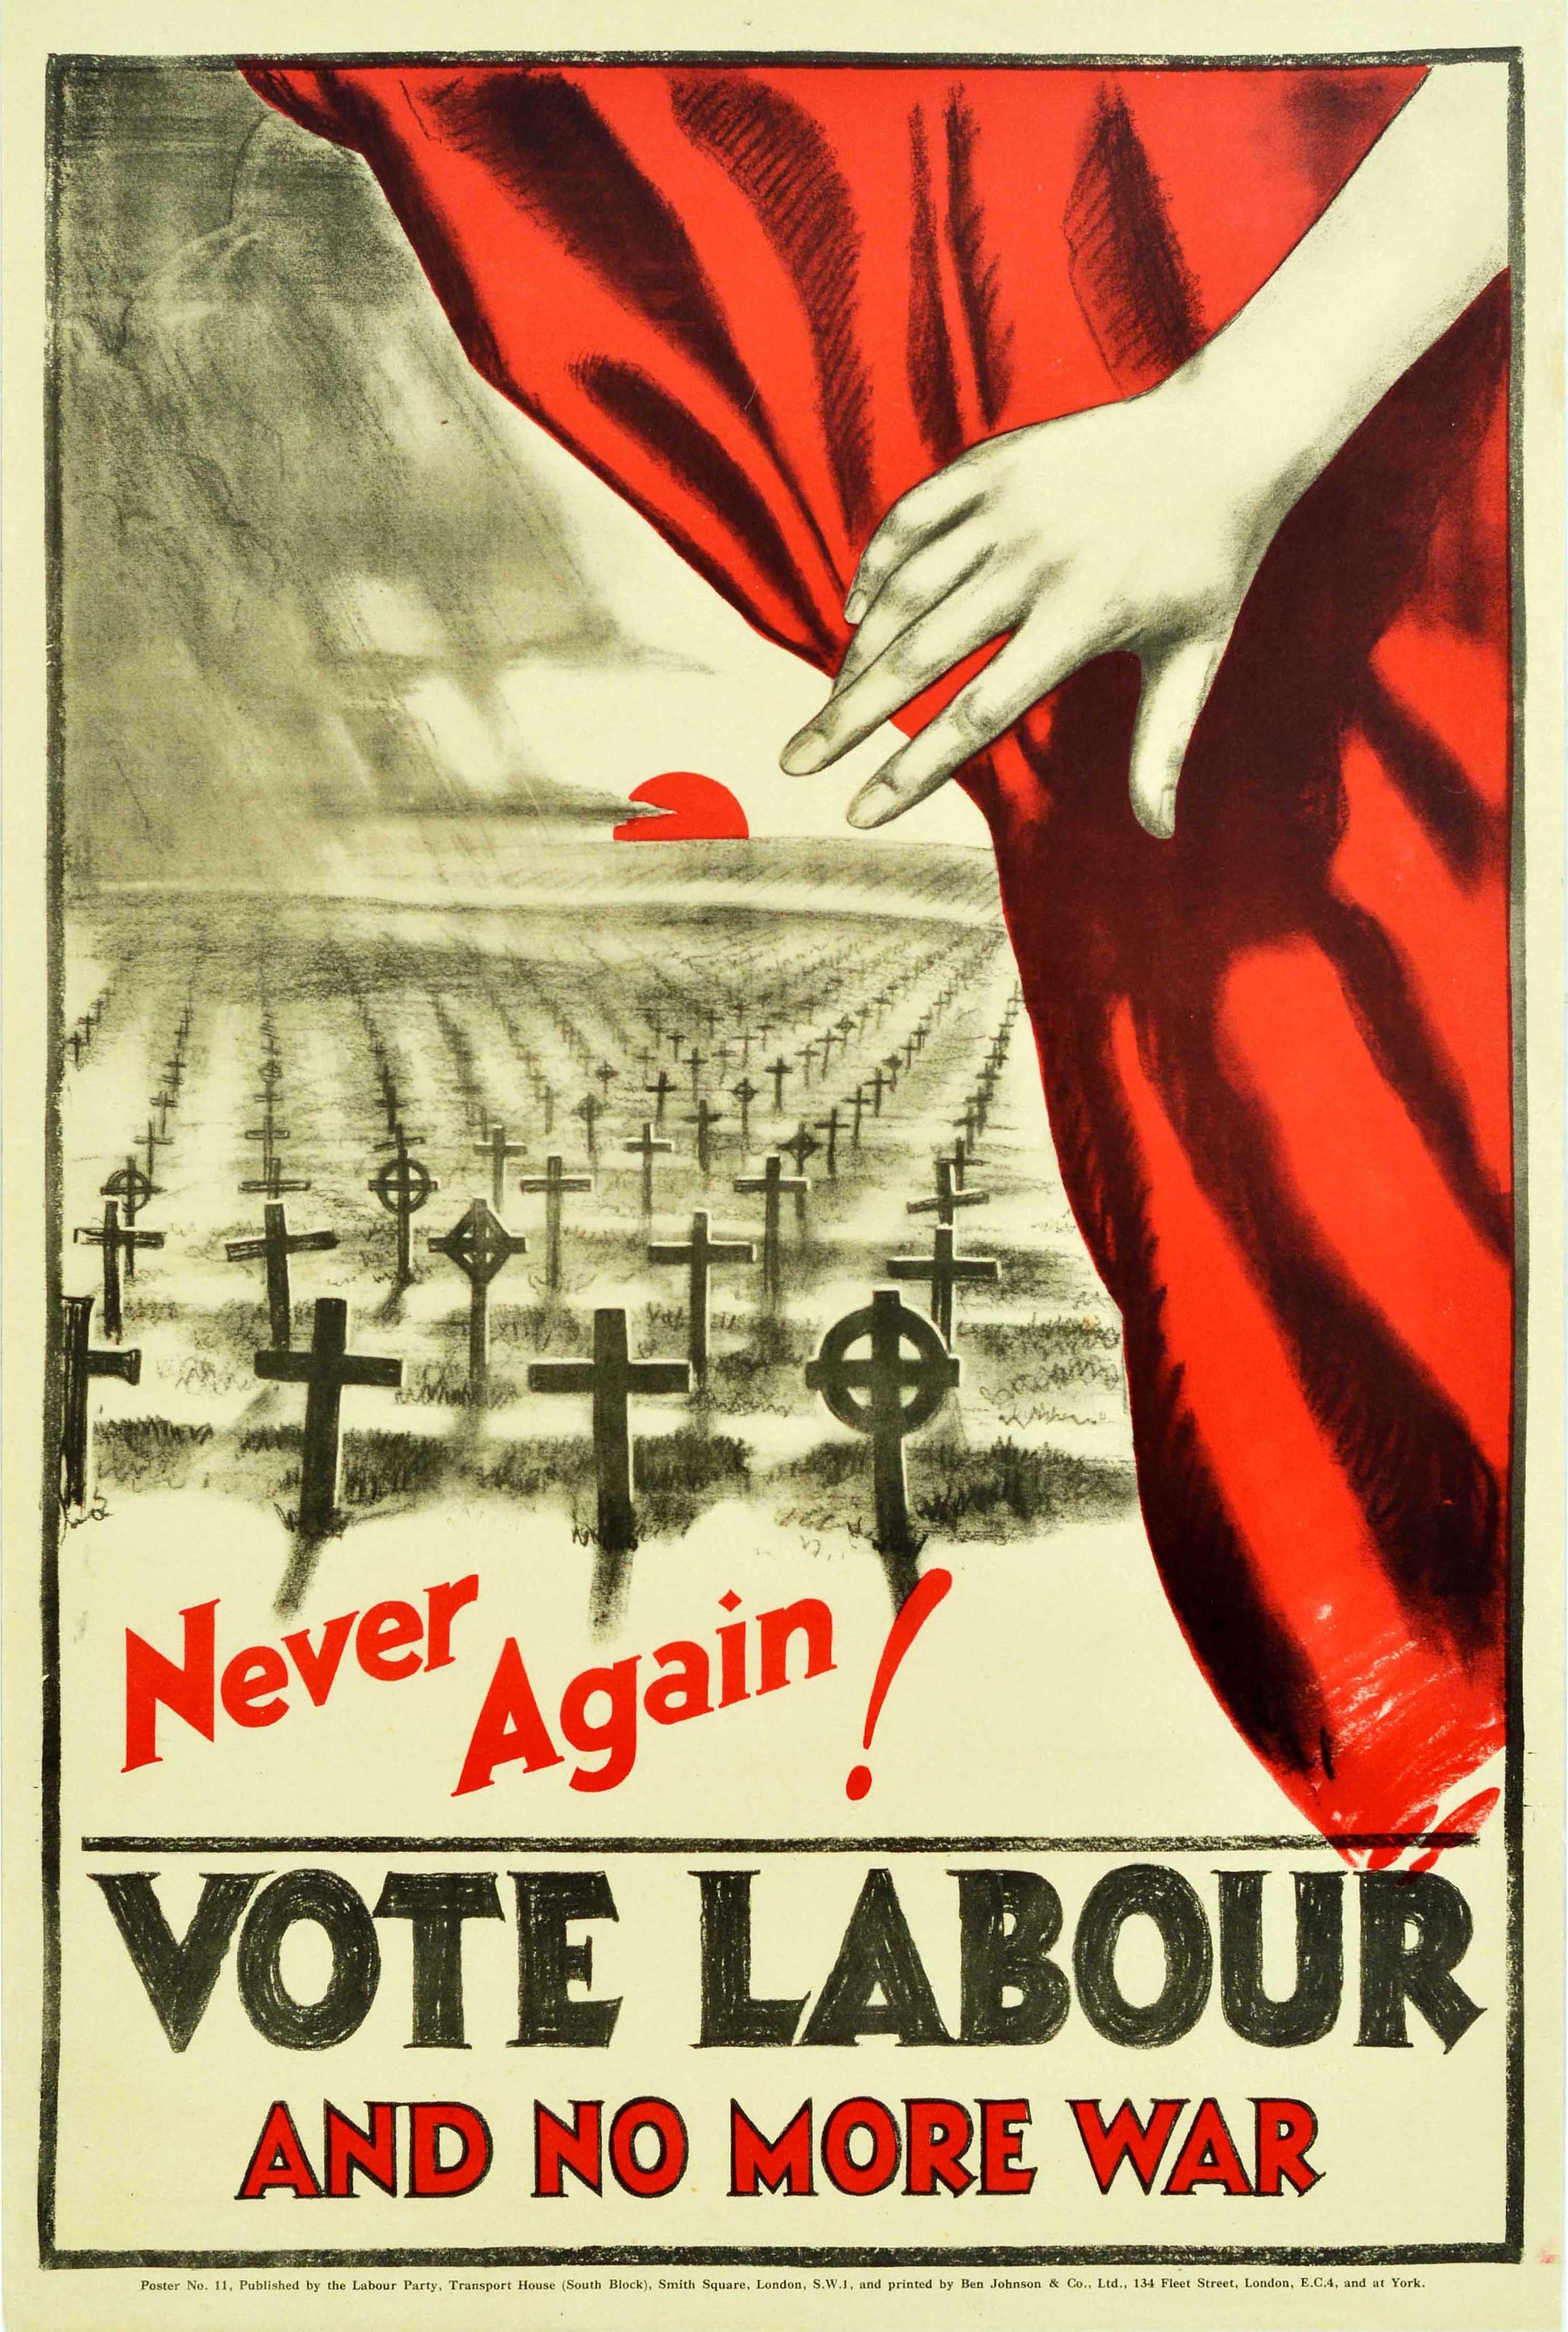 Unknown Print - Original Vintage Poster Never Again Vote Labour And No More War UK Elections